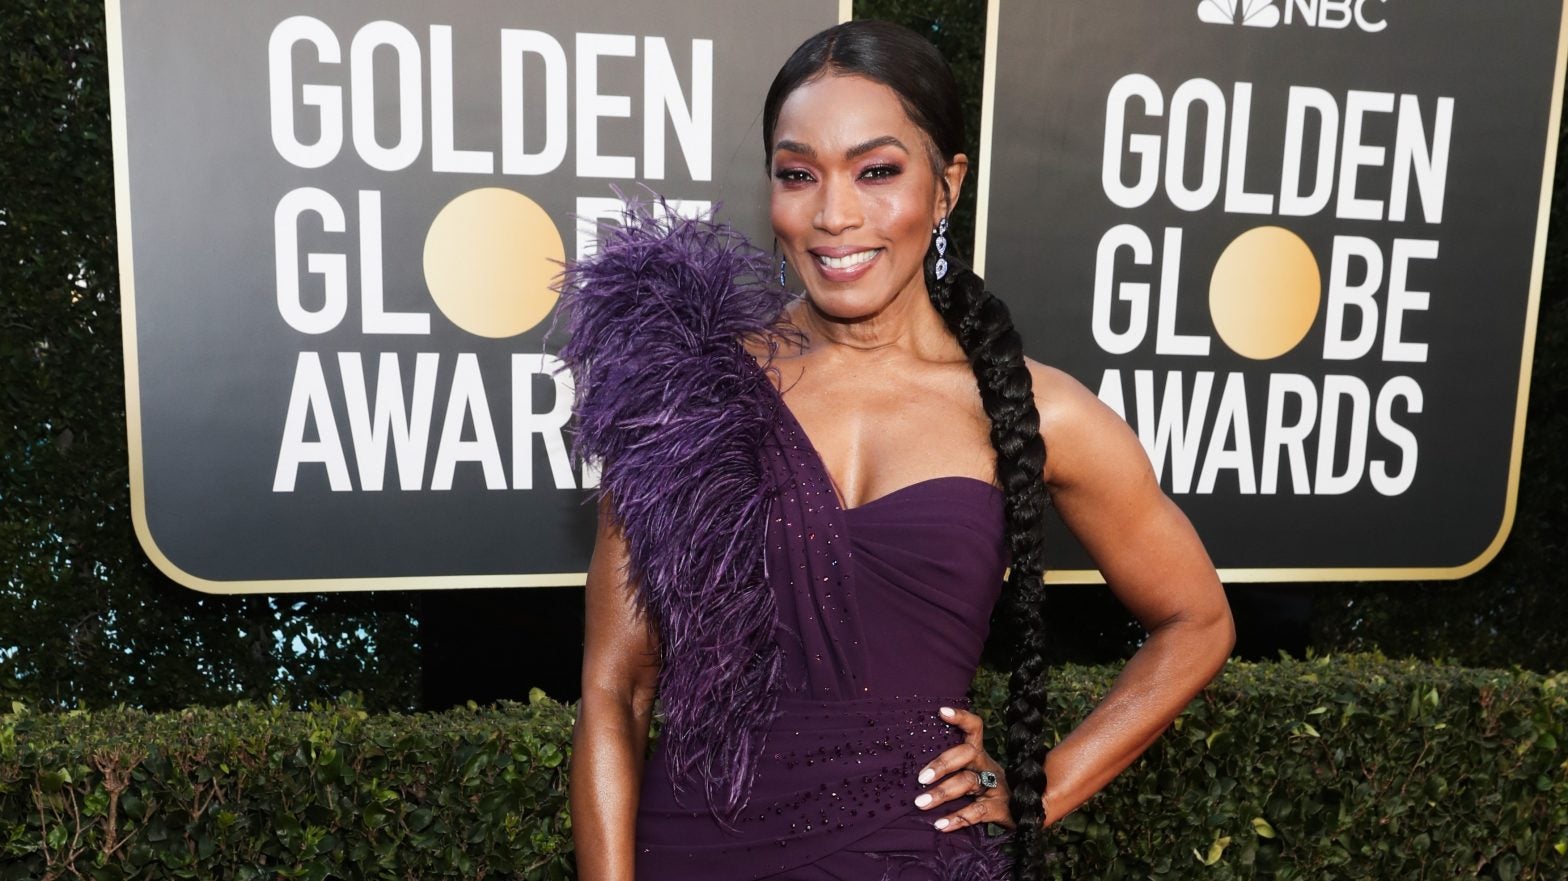 Let's Talk About Angela Bassett's Braid At The Golden Globes Awards